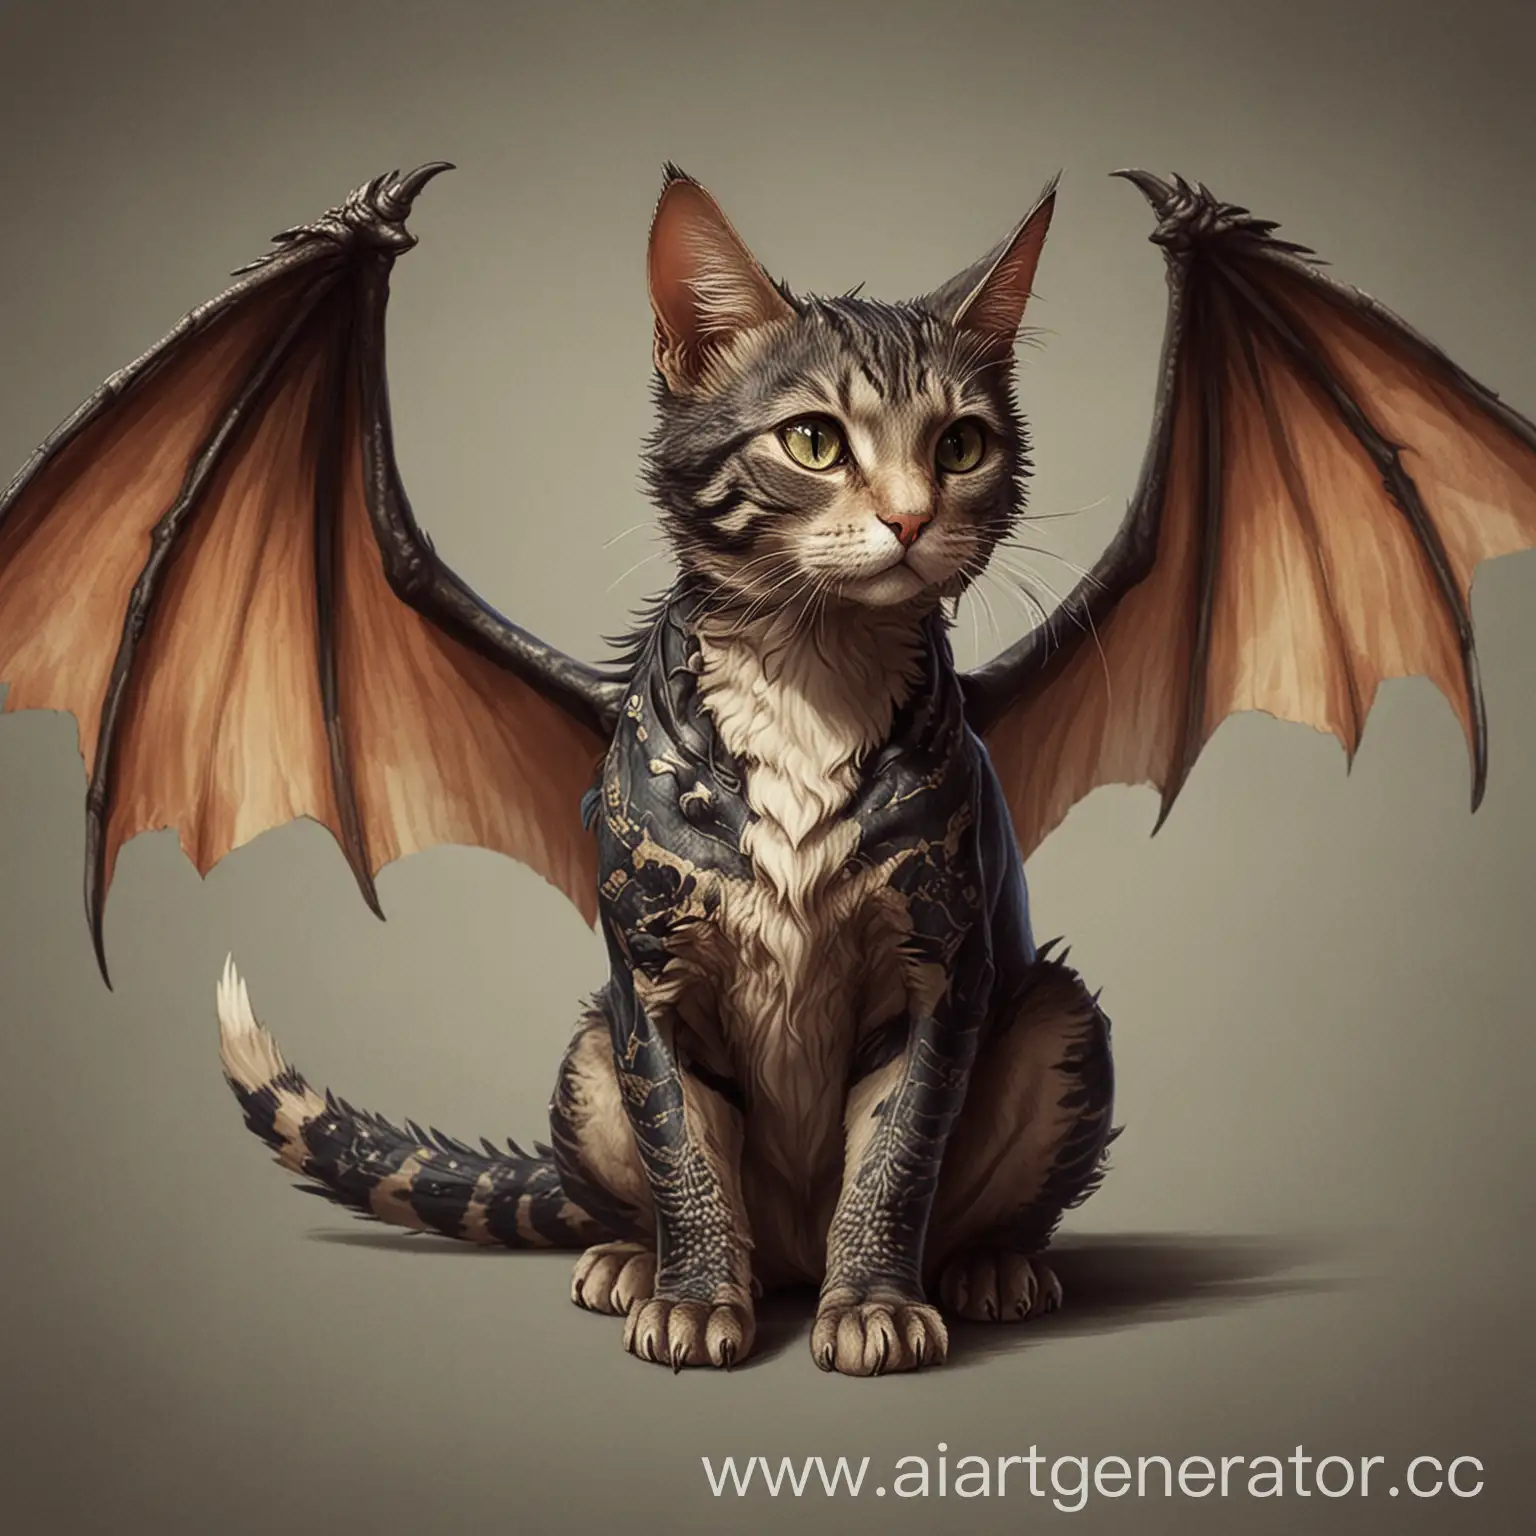 Winged-Cat-Dragon-Majestic-Feline-with-Dragonic-Features